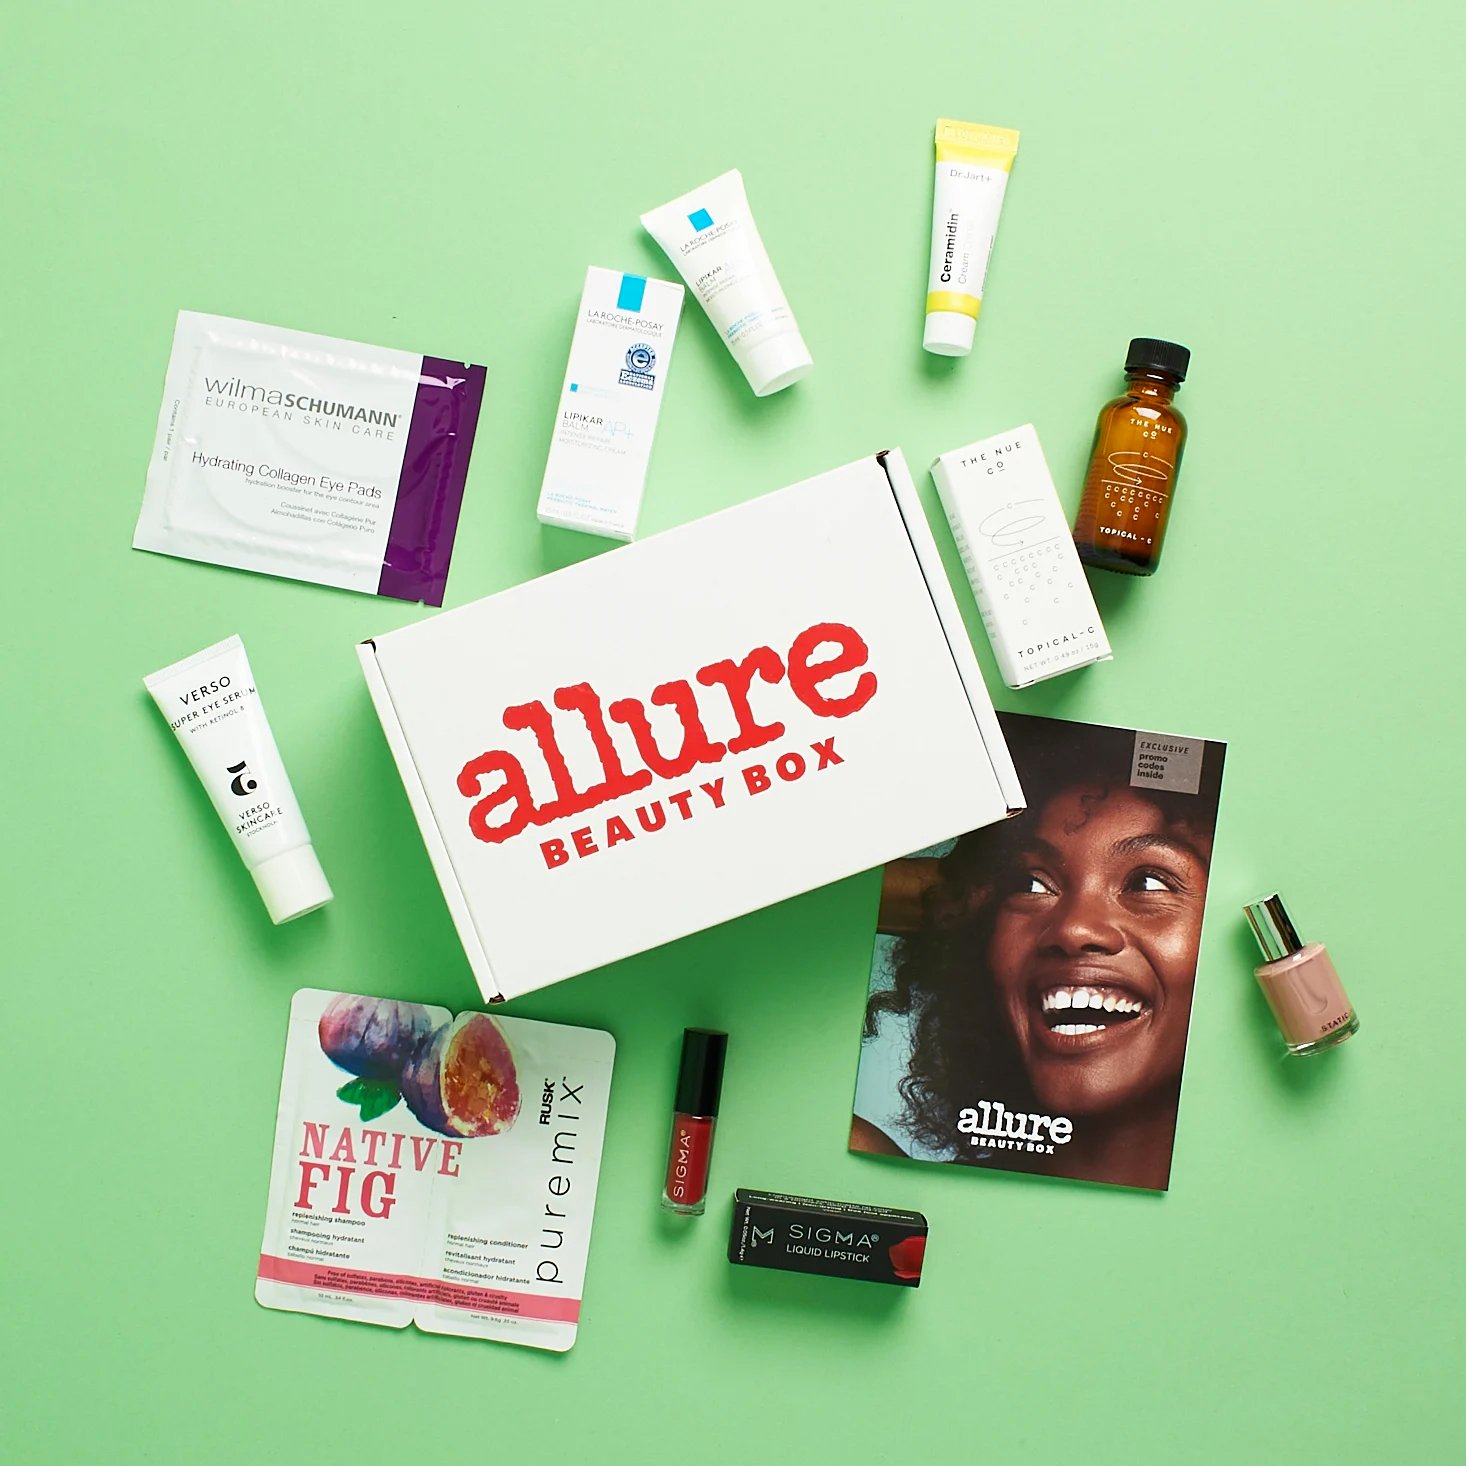 Allure Beauty Box: New Sunday Riley Bonus Gifts for First Time Subscribers + Coupon